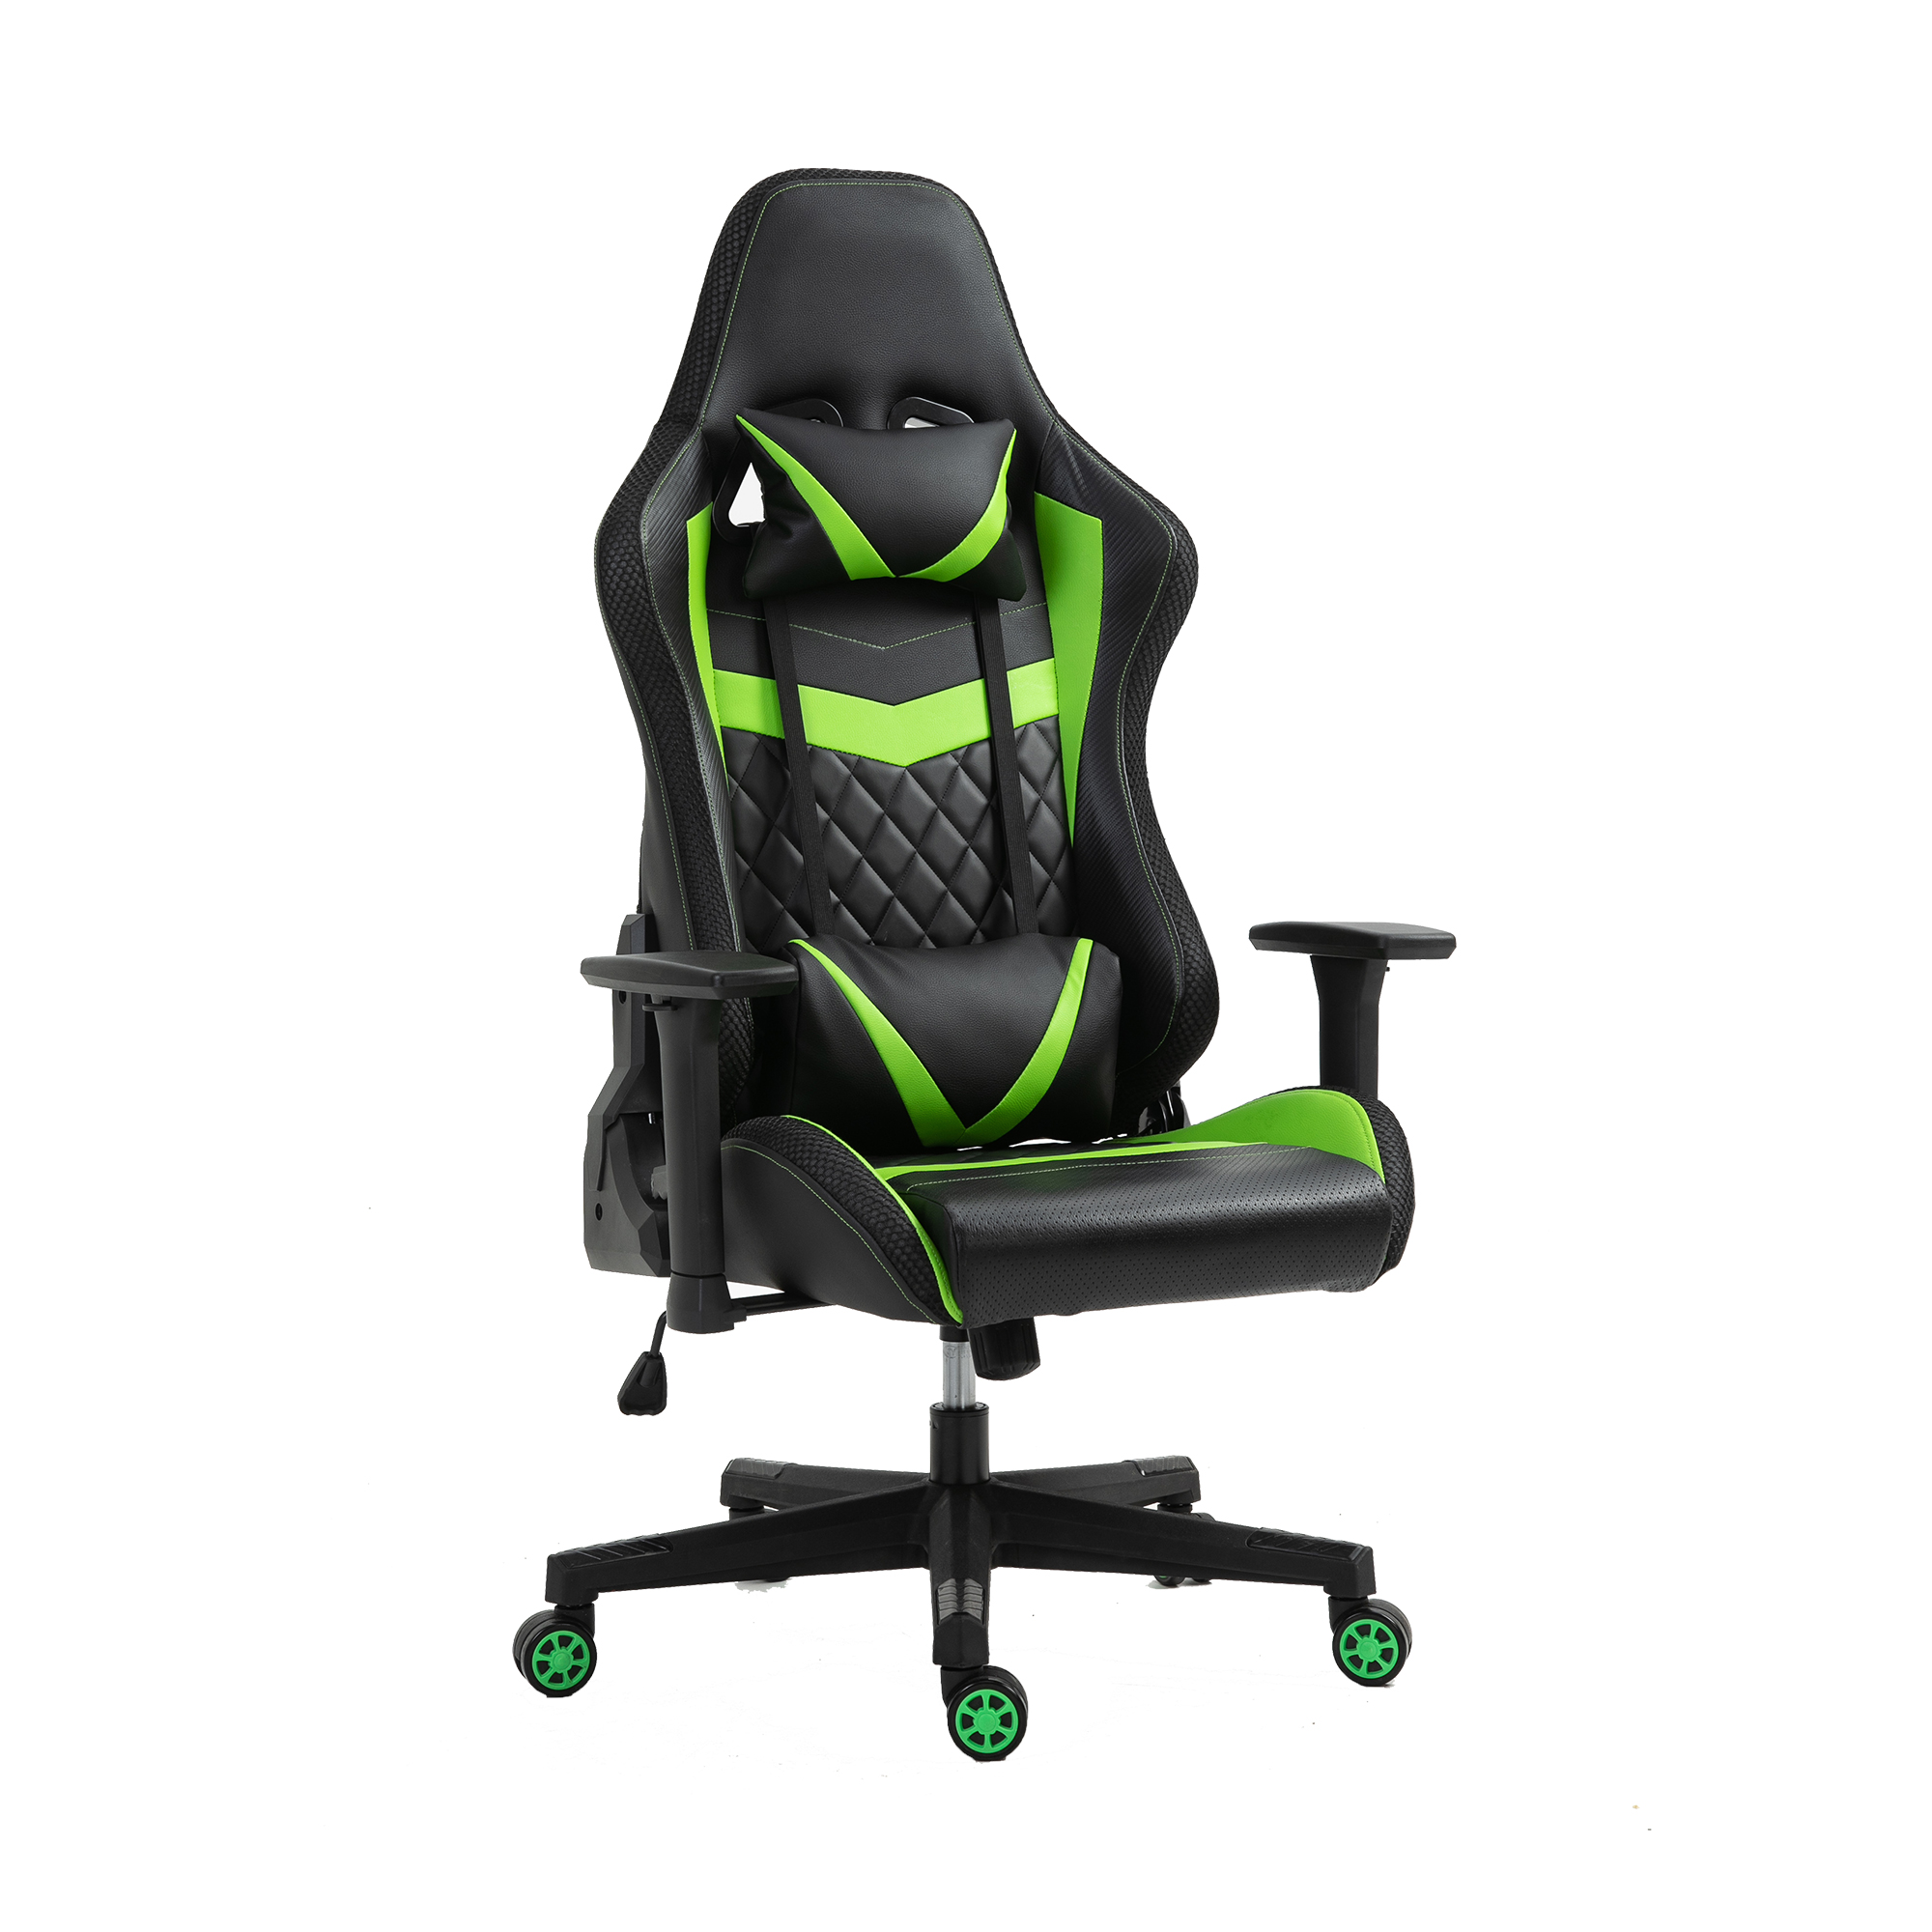 OEM High Quality White Gaming Chair Manufacturers –  Free Sample Hot Selling Cheap Leather Racing Chair For Gamer Home Office Chairs PC Gaming Setups – ANJI JIFANG